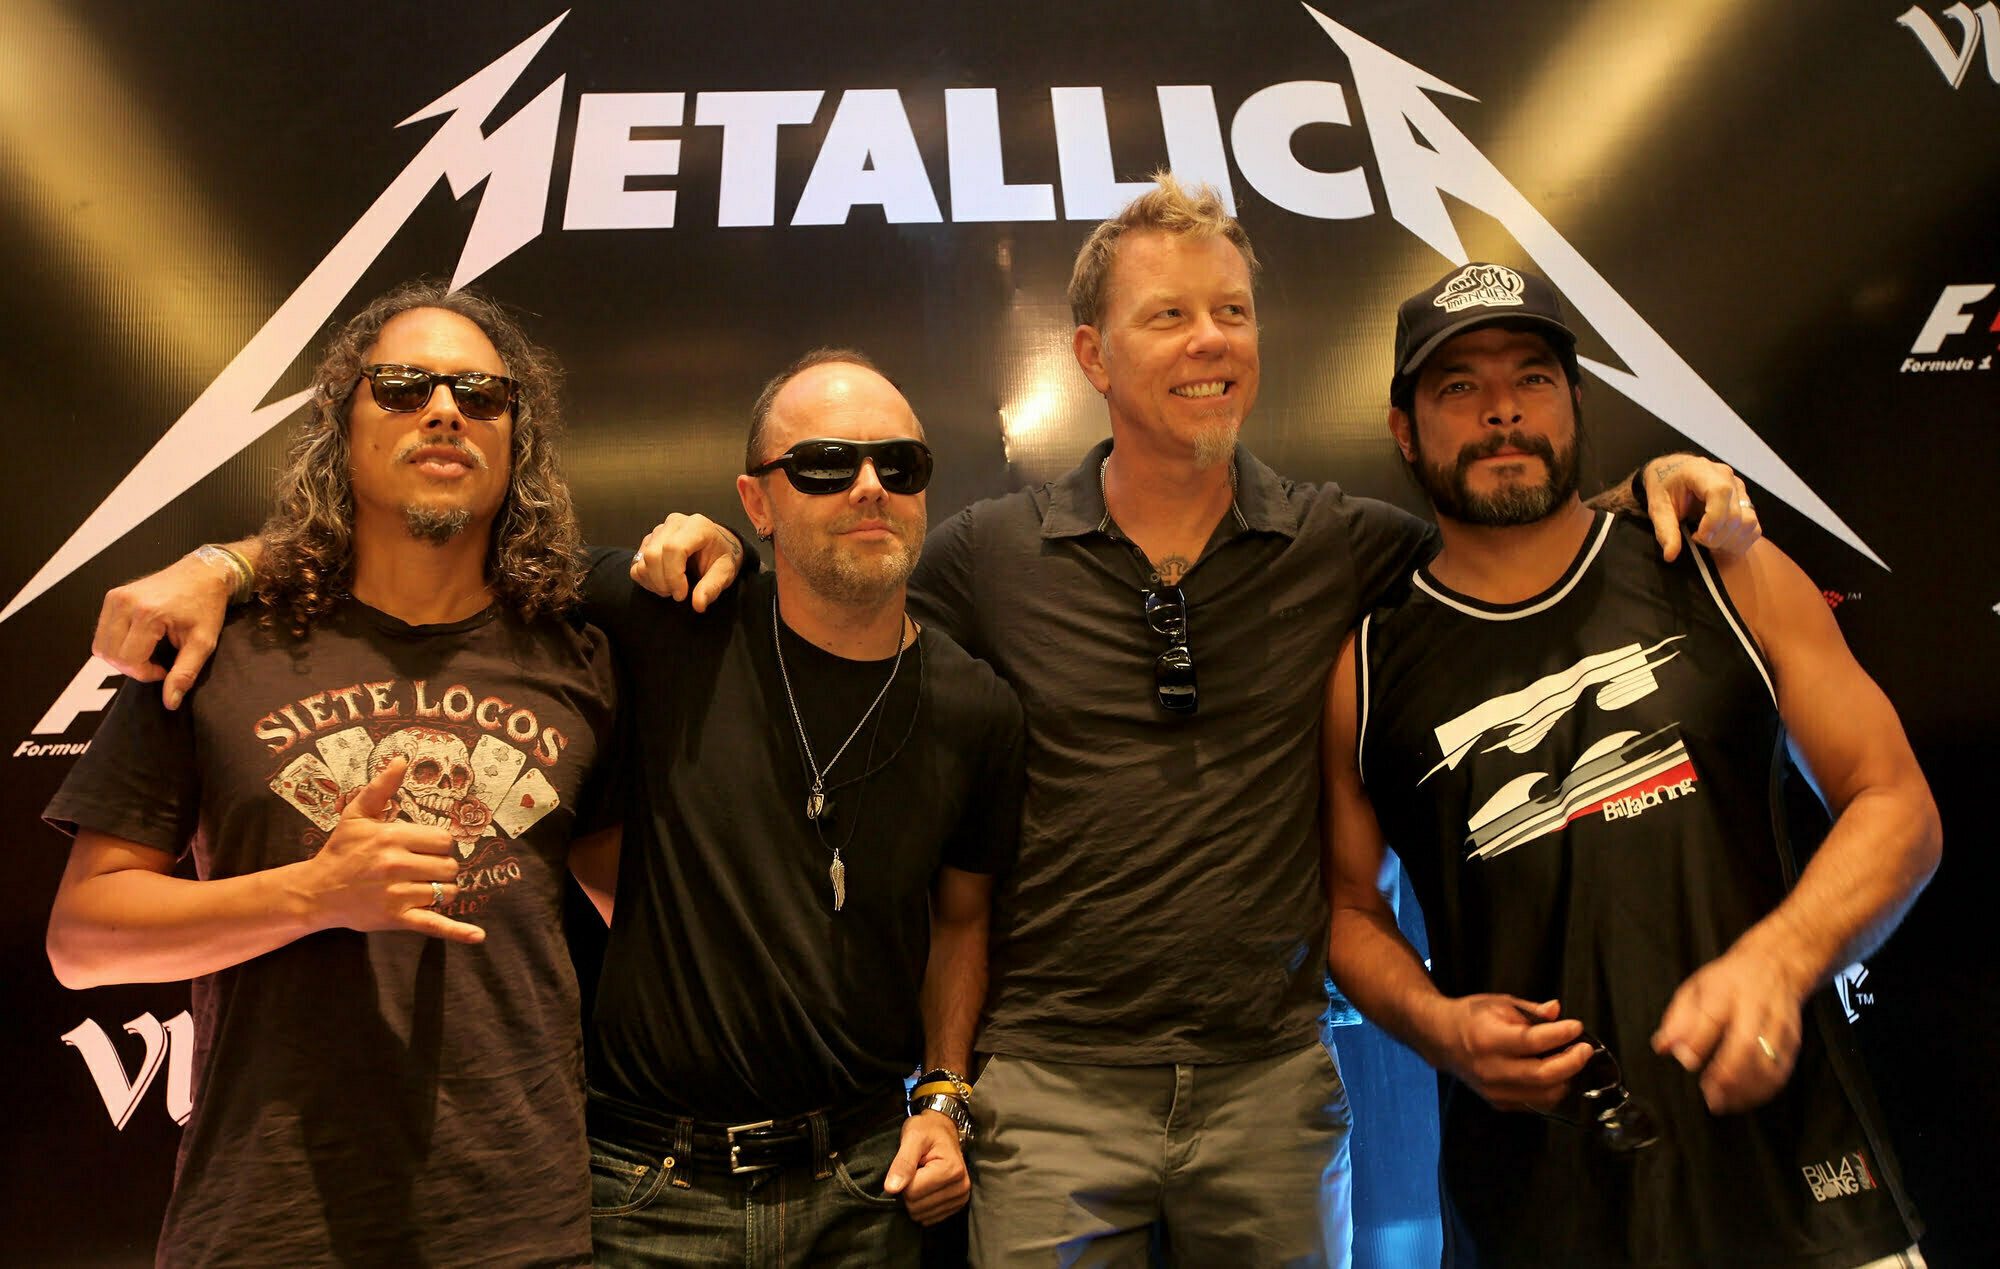 Metallica Have Bought Their Own Vinyl Pressing Plant